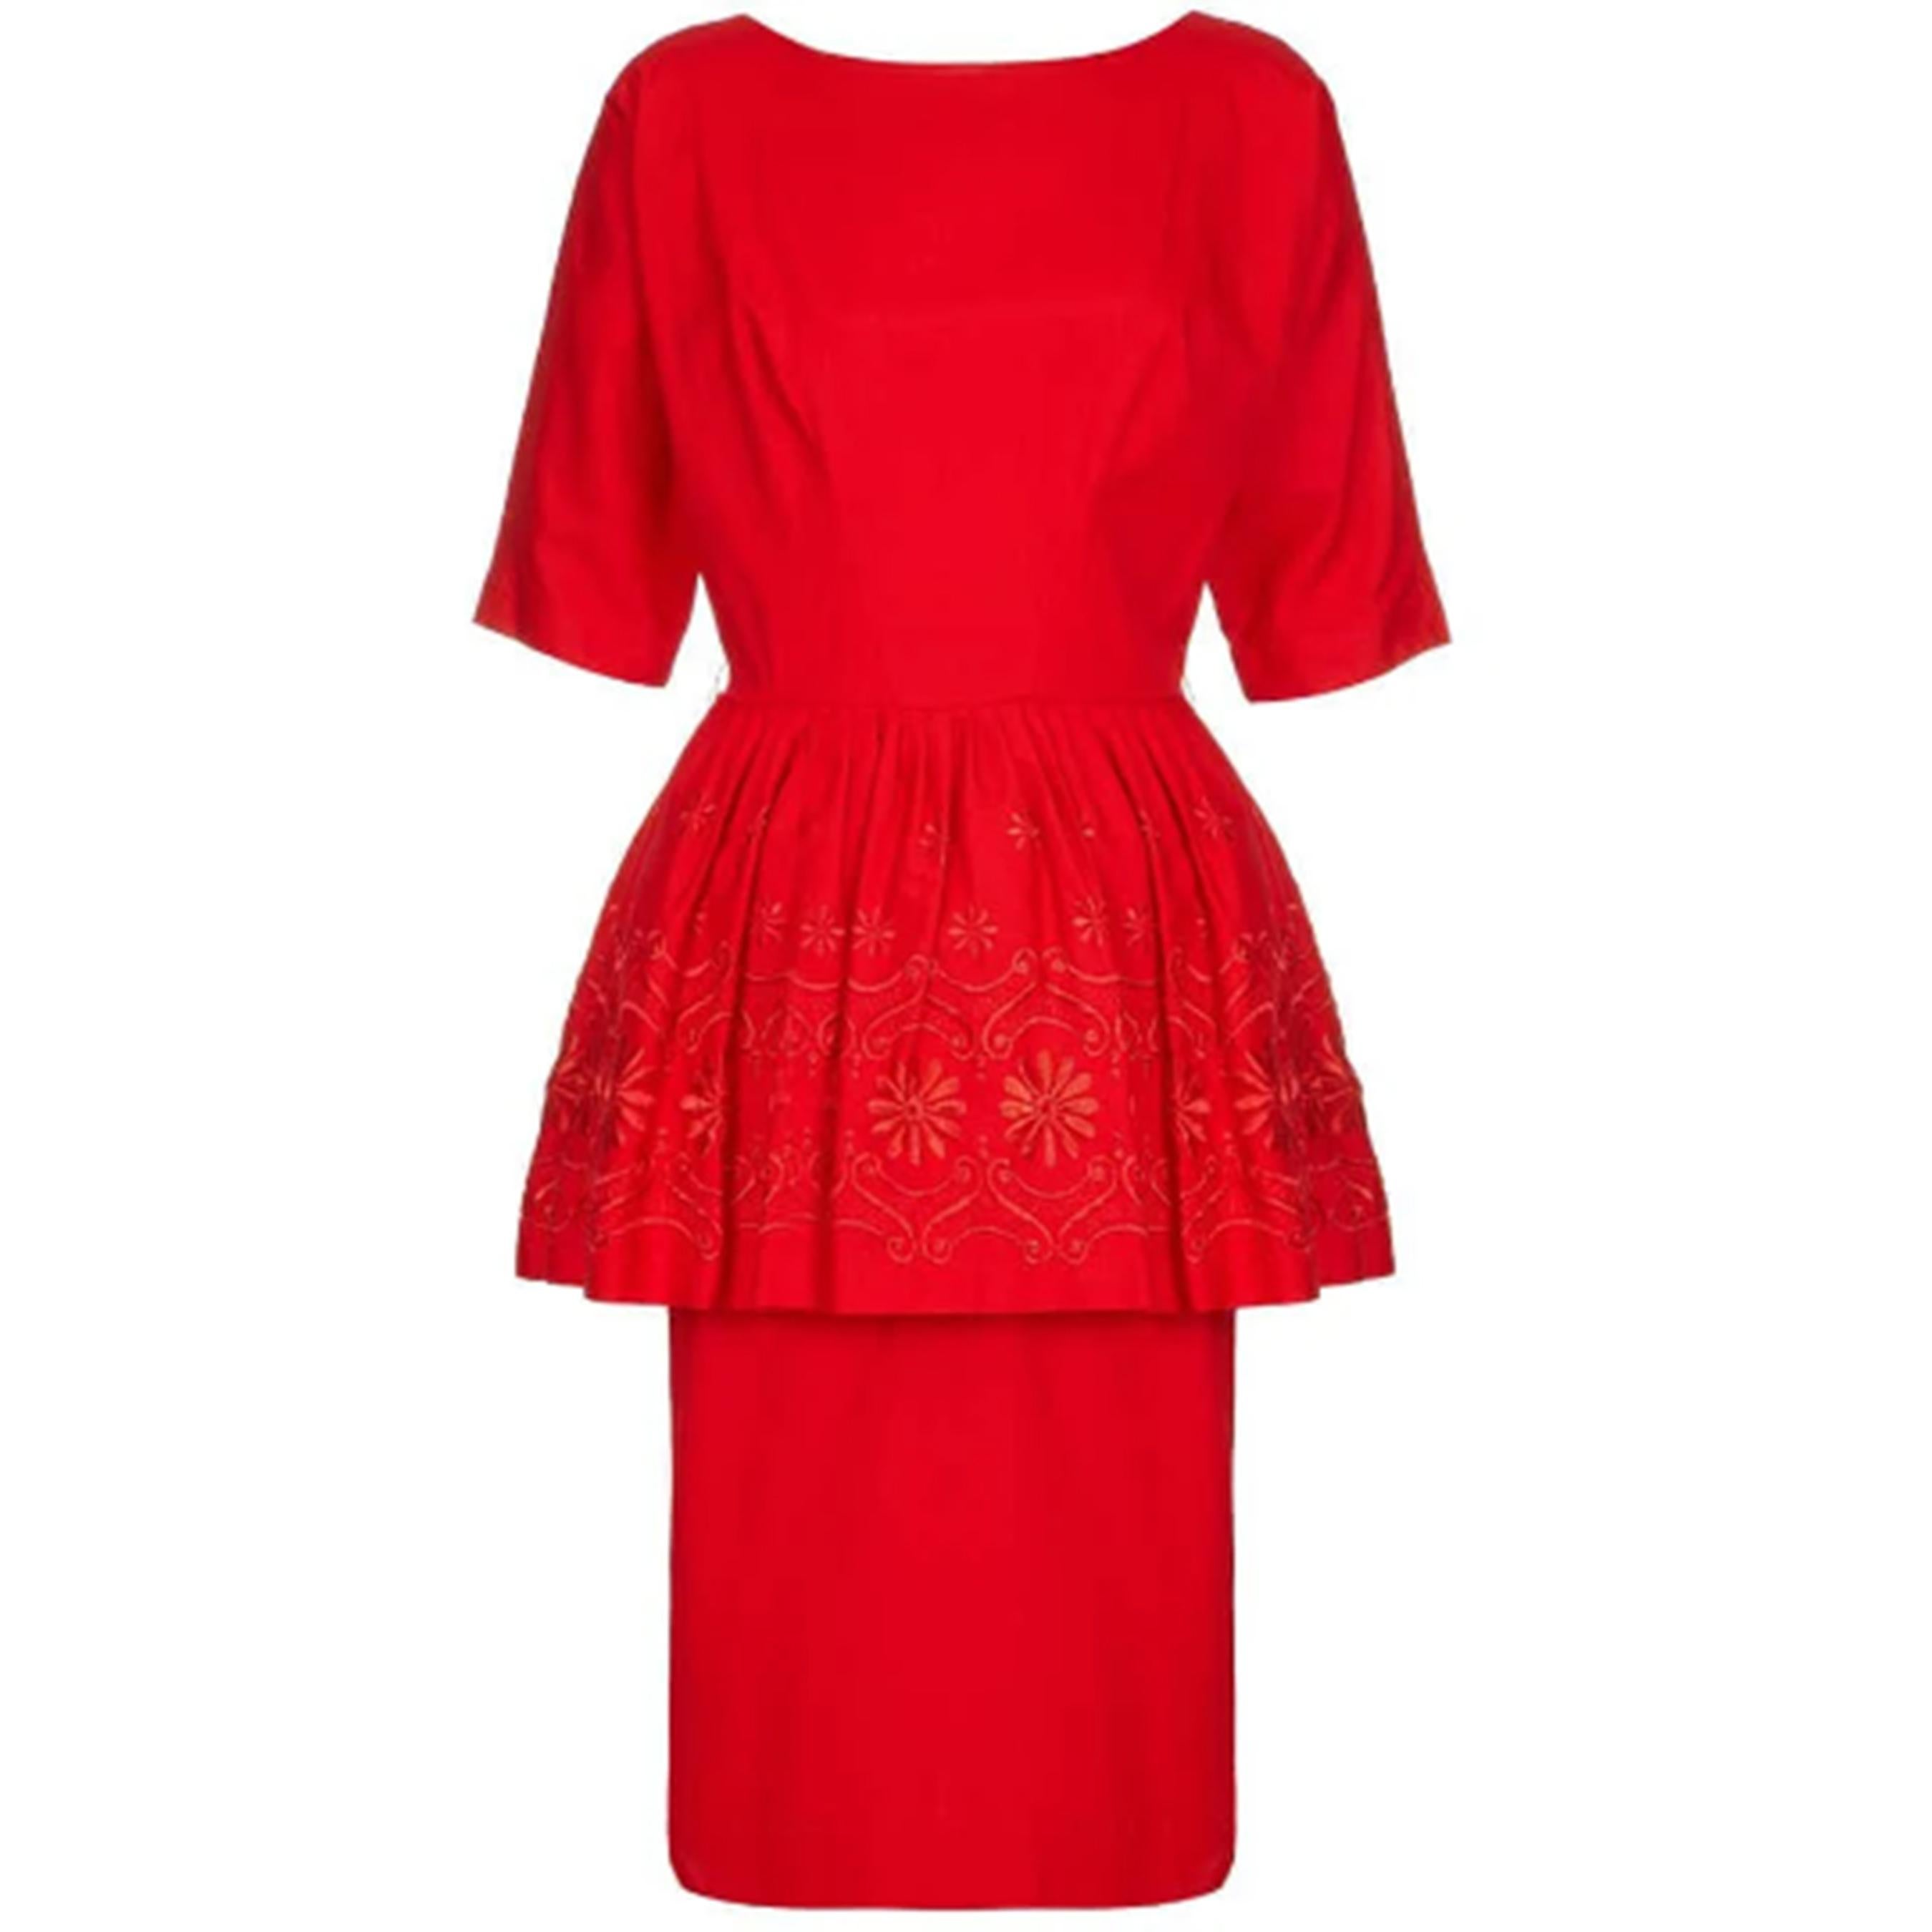 1950s or early 1960s red cotton dress with floral embroidered and pleated peplum. The dress also features elbow length sleeves, fitted bodice and underskirt and it fastens at the back with a zip. This is a great all year round dress, Union made in